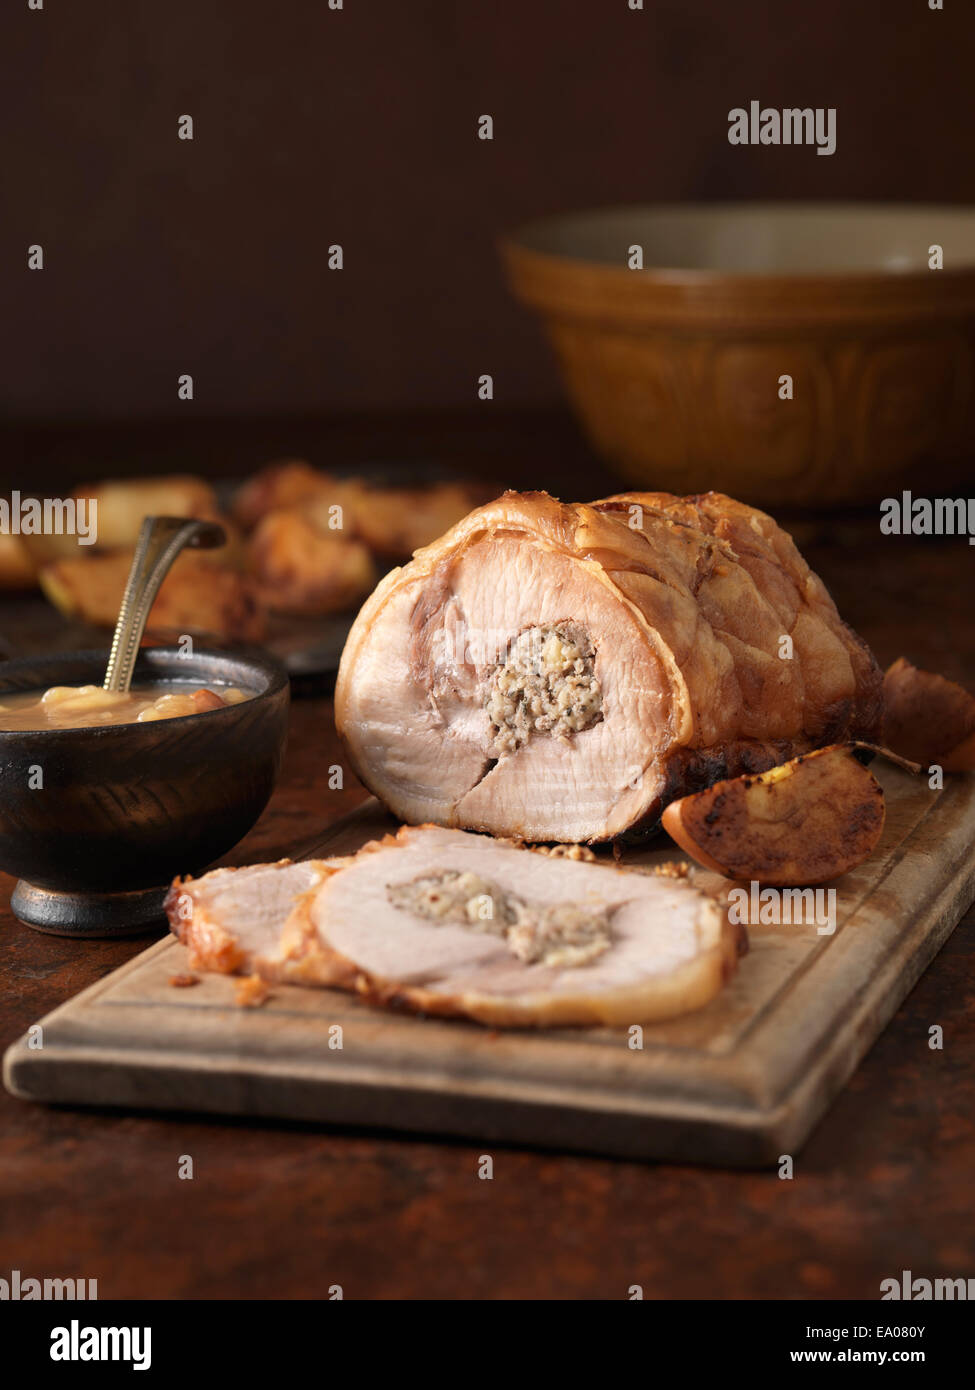 Christmas dinner. Roasted pork loin with pork and apple stuffing and roast potatoes Stock Photo